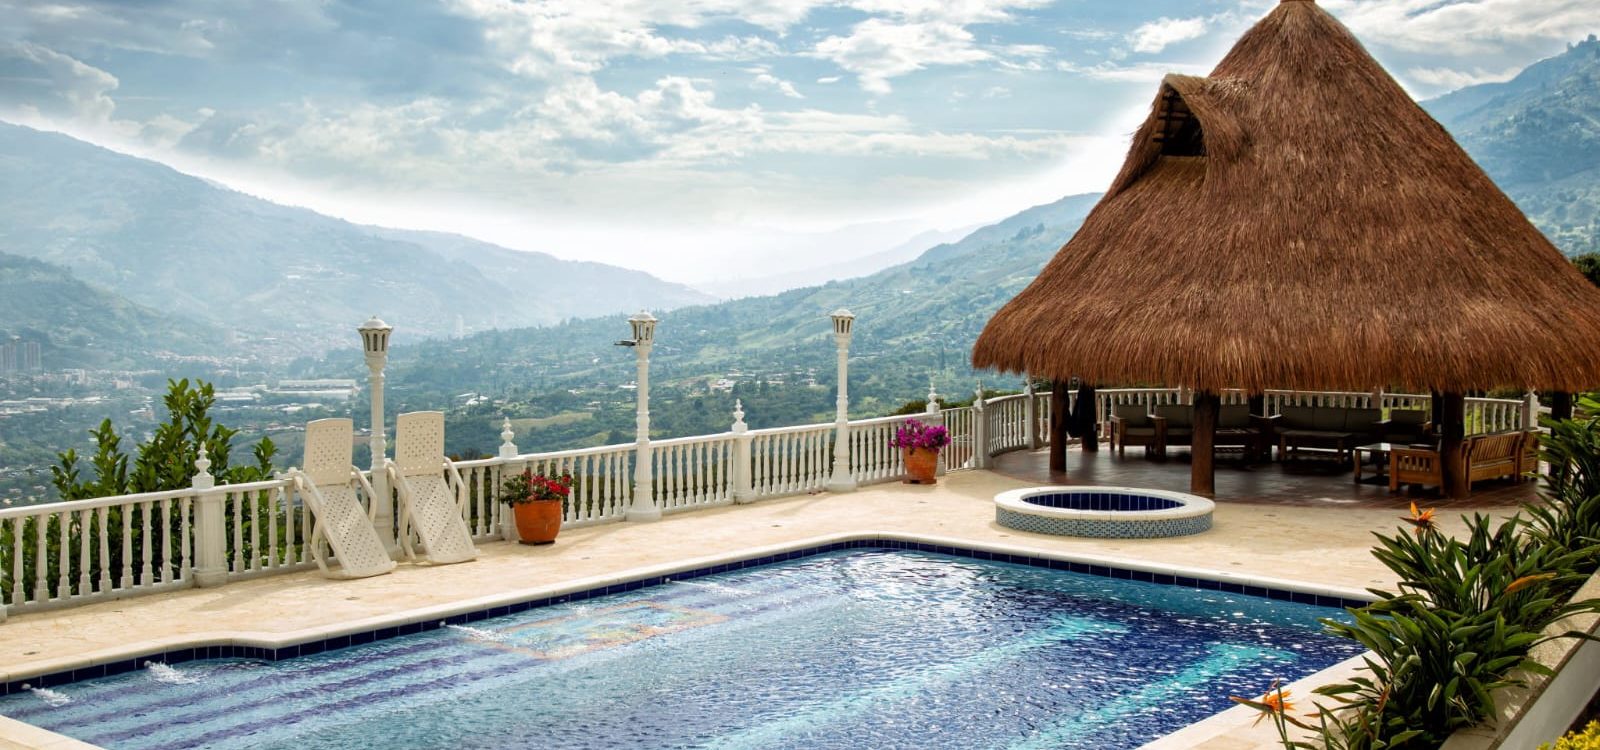 Incredible Finca in Town of Giradota 40 Minutes From El Poblado With Two Guest Houses, Swimming Pool, and Jacuzzi